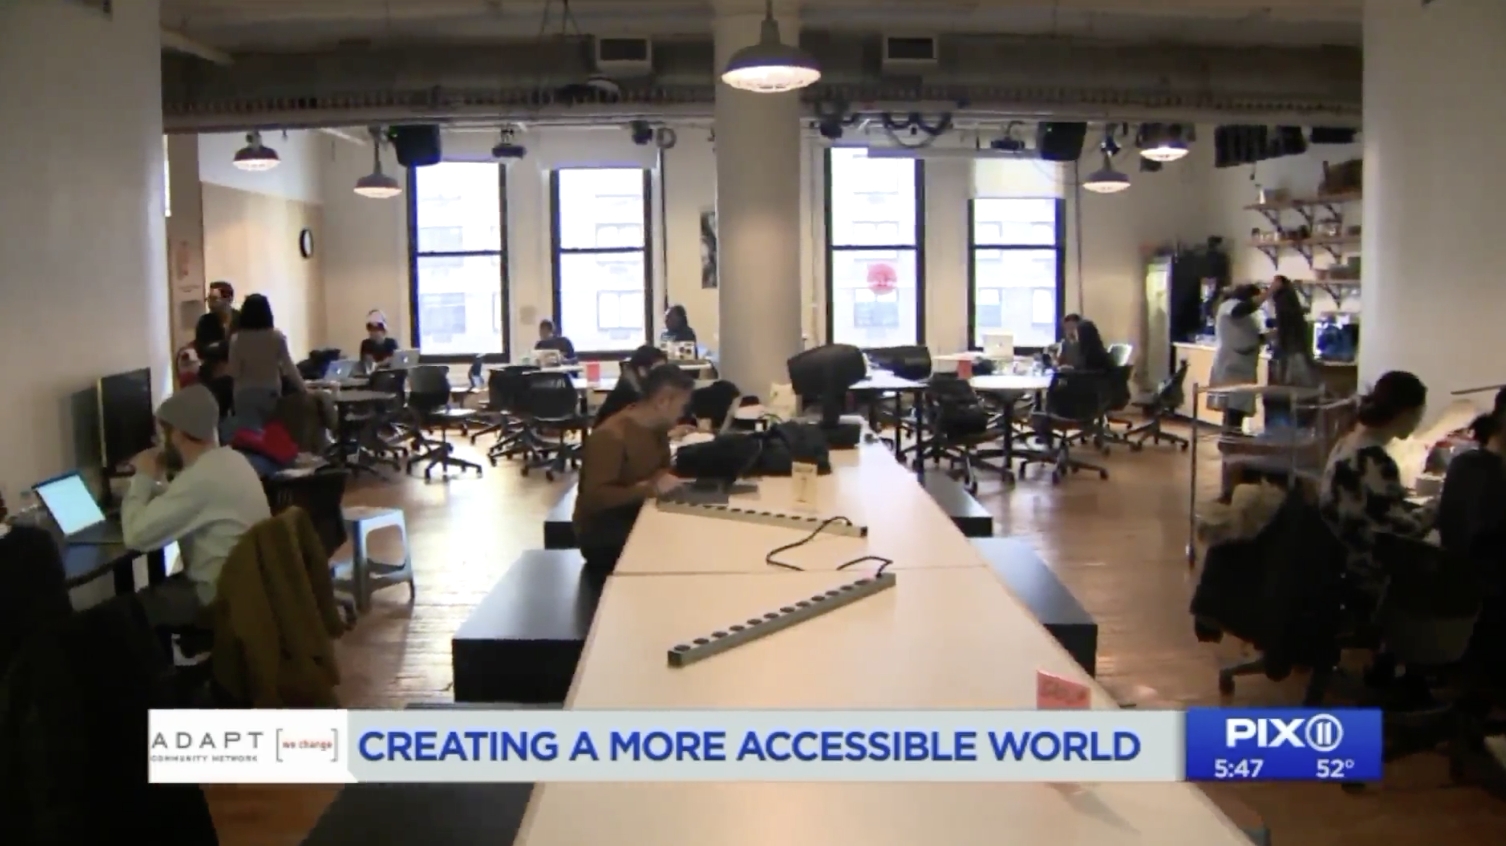 Screenshot of ITP from the Pix11 interview, reads "creating a more accessible world"